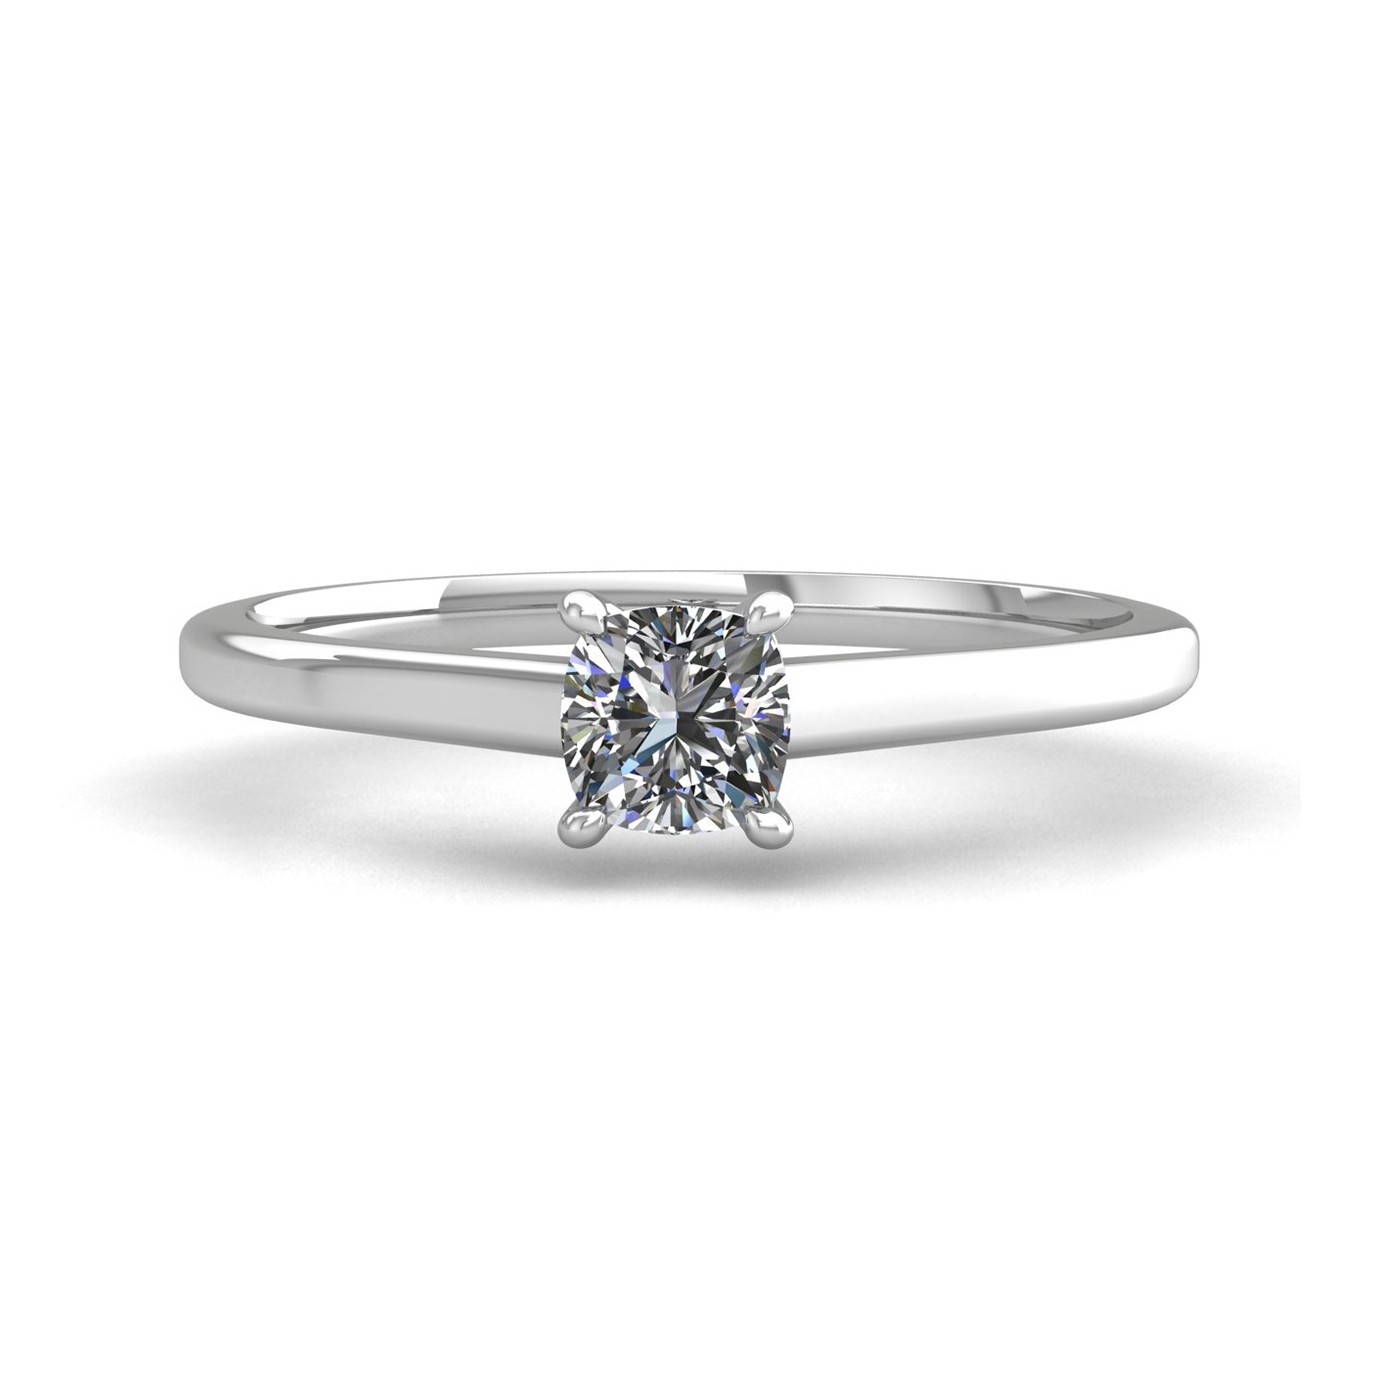 18k white gold 1.0ct 4 prongs solitaire cushion cut diamond engagement ring with whisper thin band Photos & images